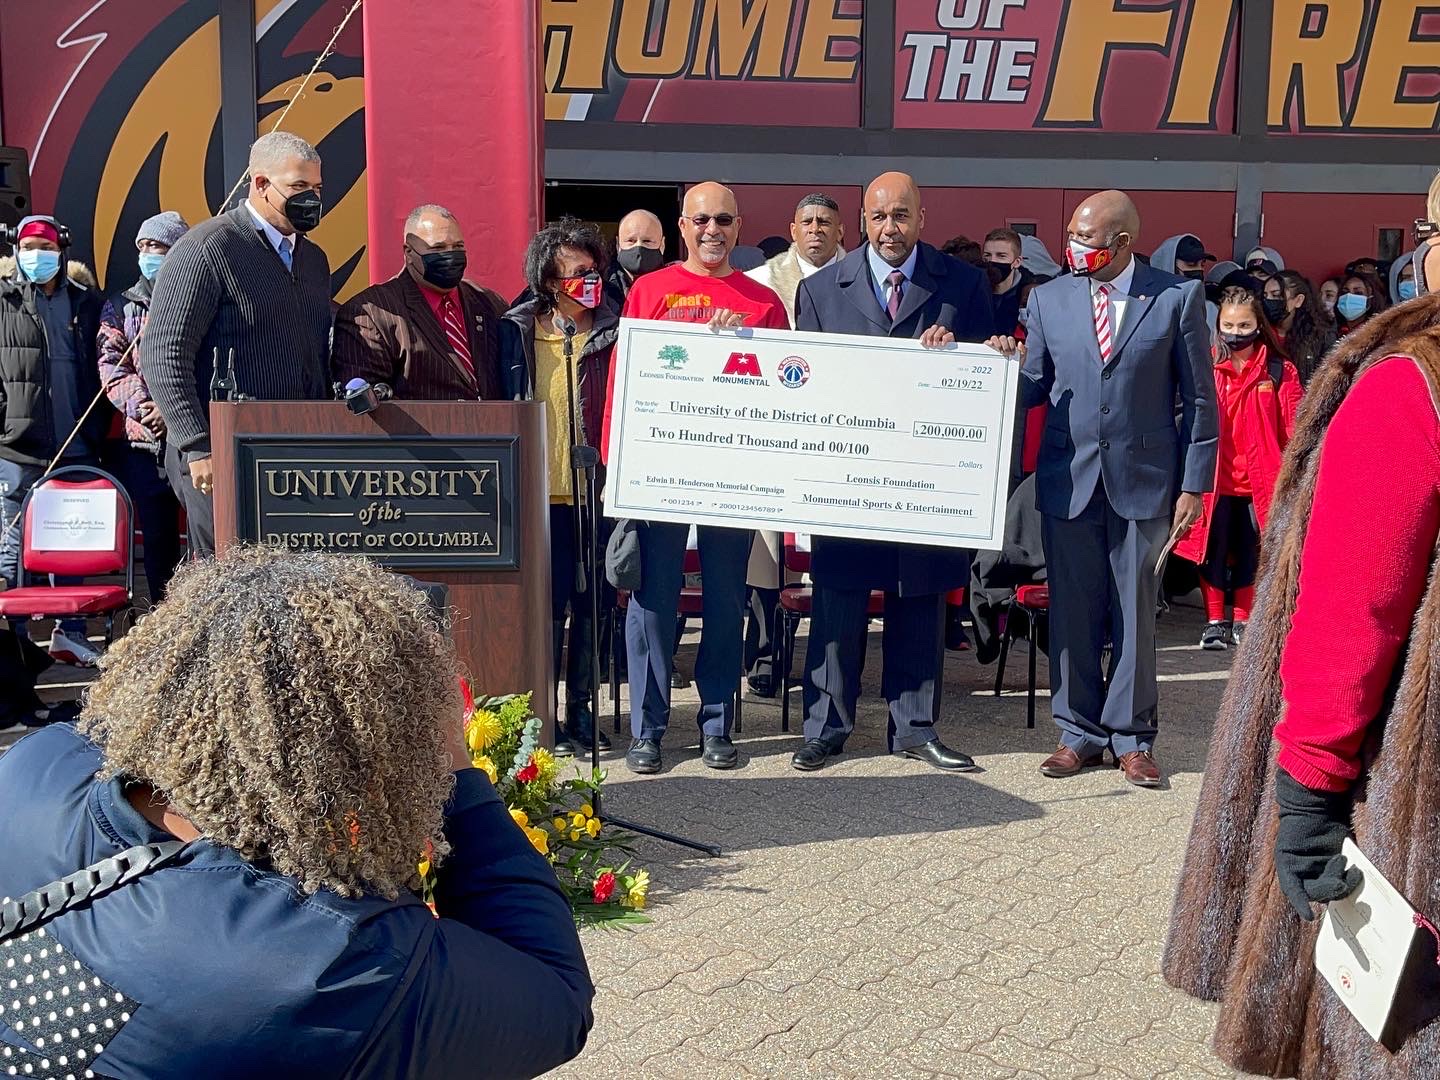 UDC receives $200,000 donation from The Leonsis Foundation,Monumental Sports & Entertainment and Washington Wizards…